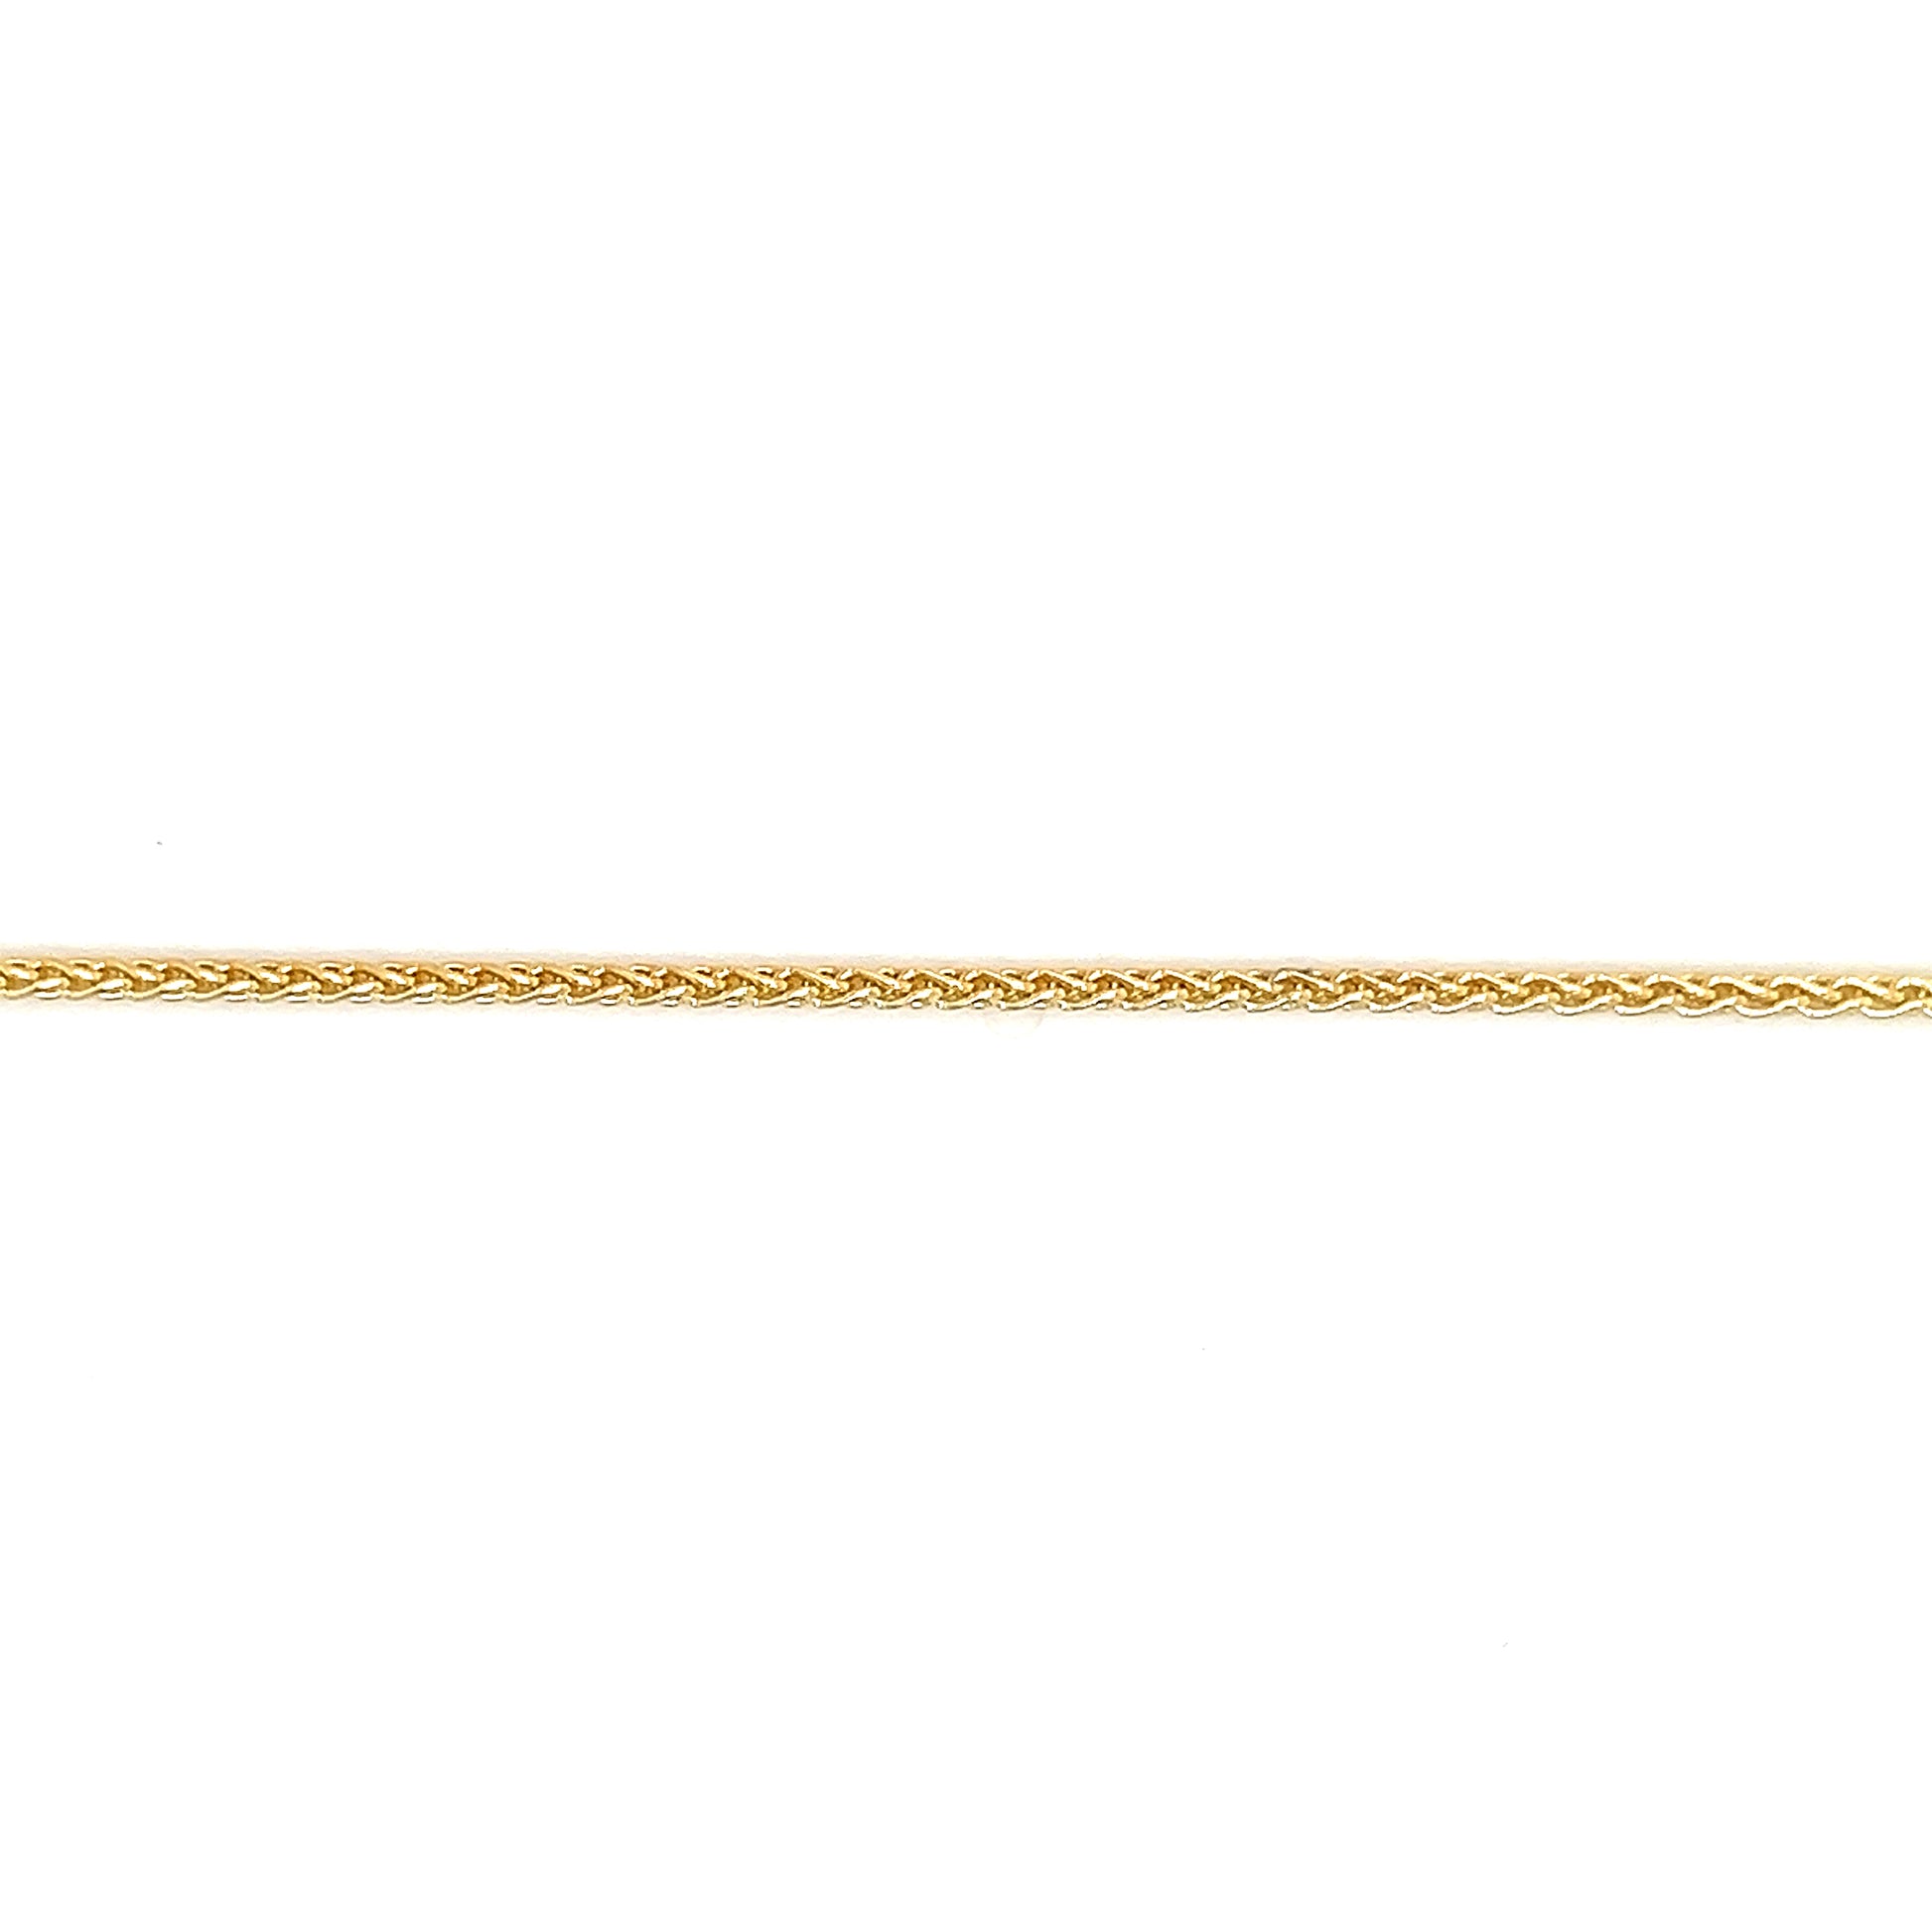 Wheat Chain 1.5mm with 20in Length in 14K Yellow Gold Chain View